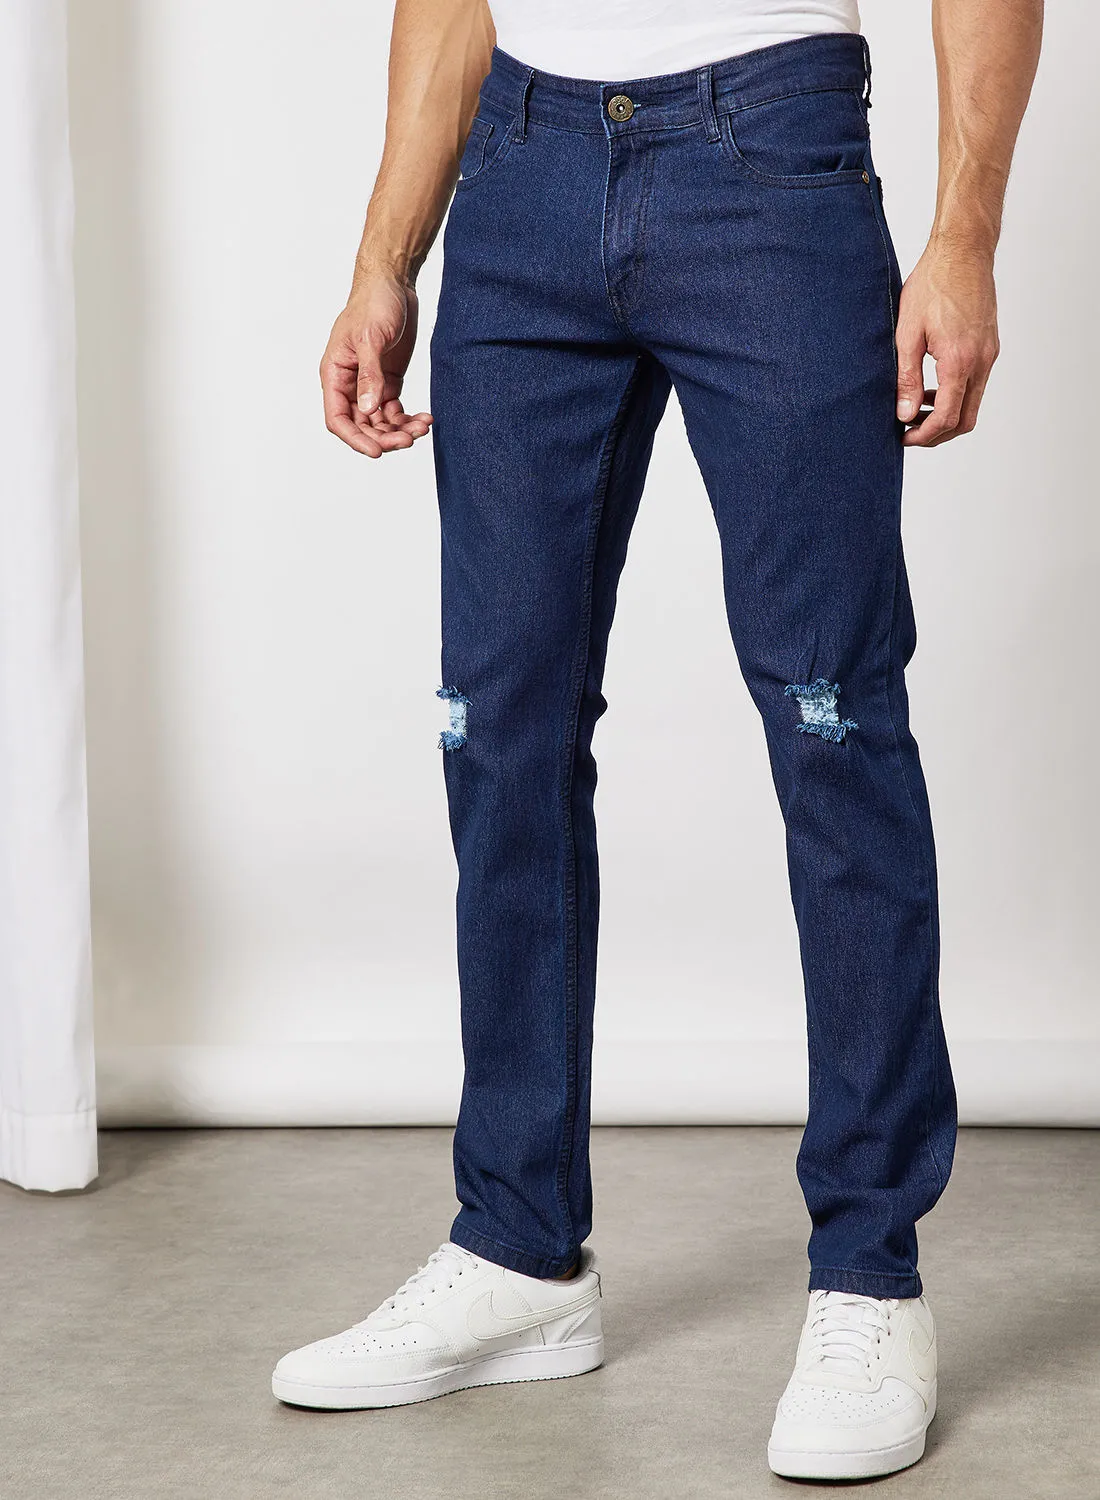 ABOF Casual Tapered Jeans Denim Blue